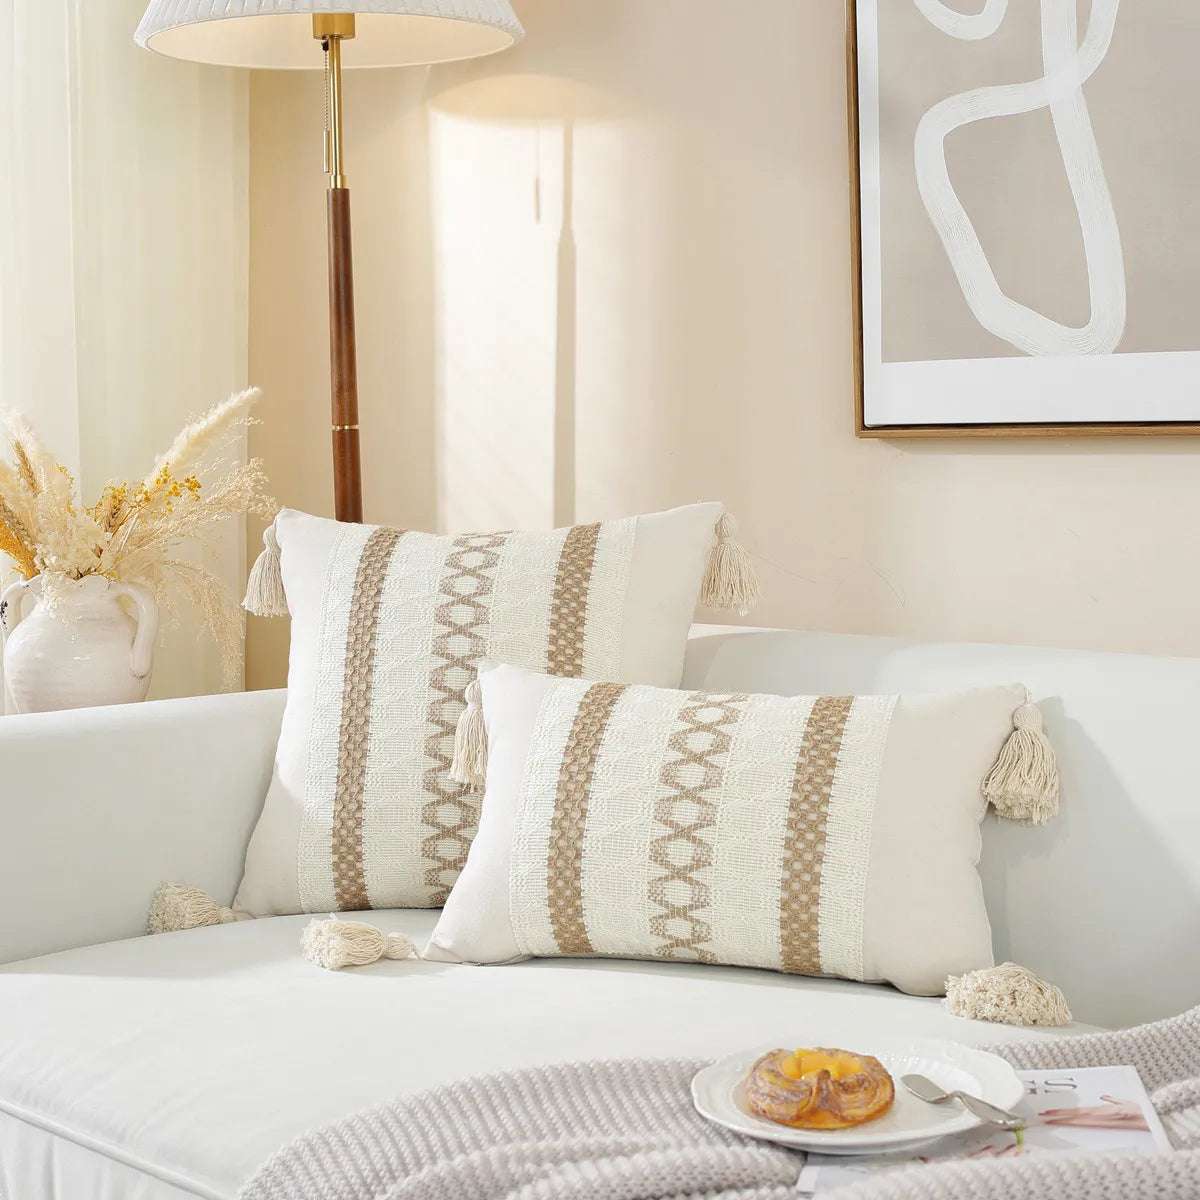 Luxury Cotton Pillow Cover pillow covers Julia M Home & Kitchen 3 30 50cmWithout core 